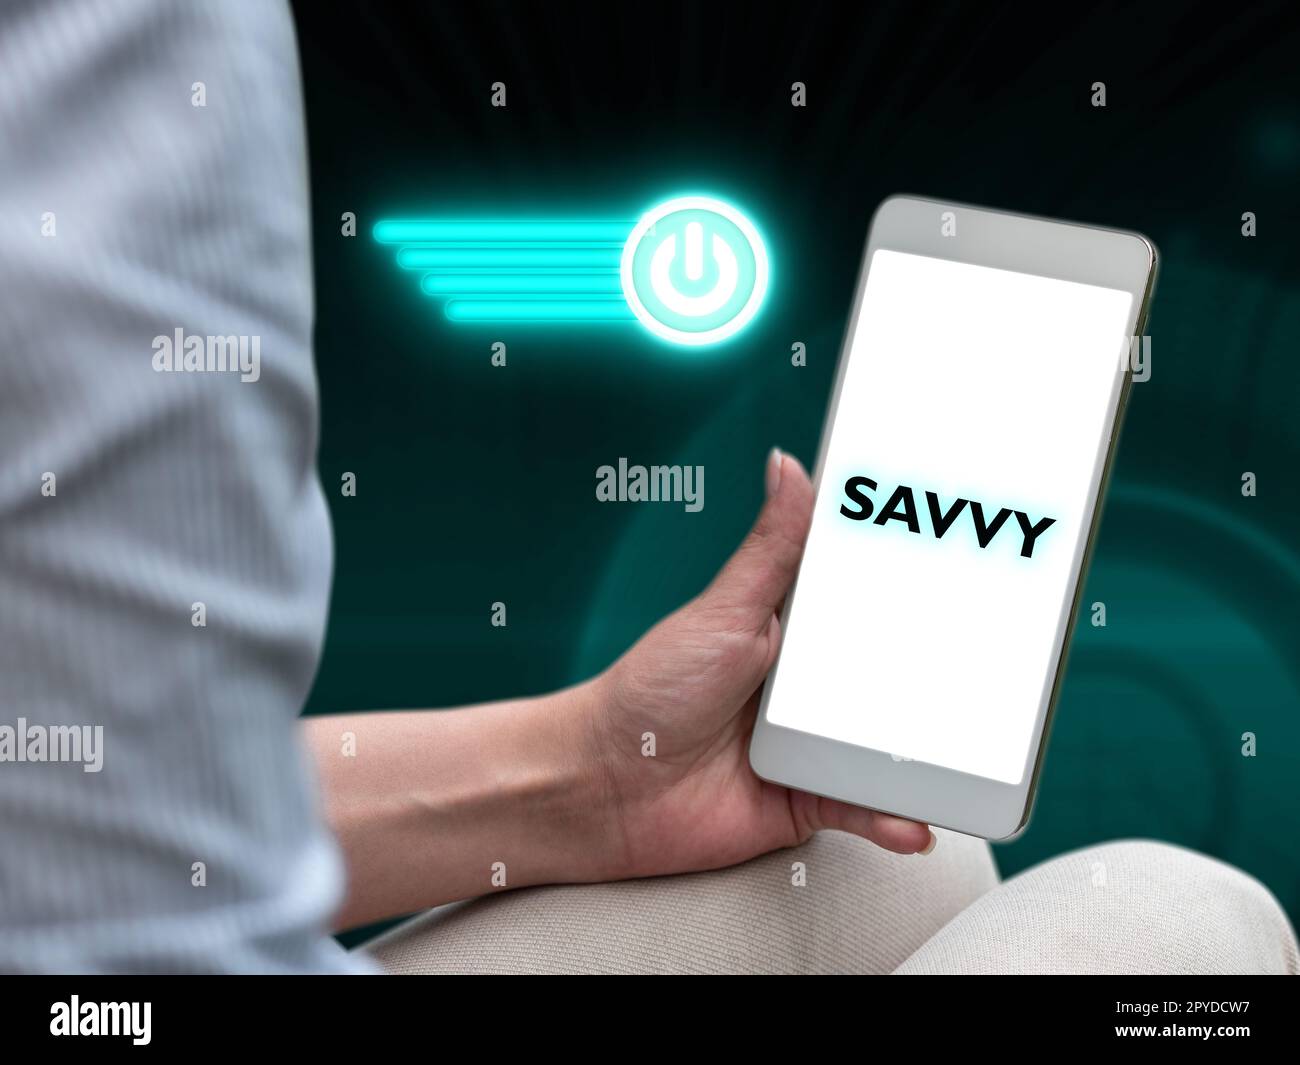 Inspiration showing sign Savvy. Business concept having perception, comprehension in practical matters Stock Photo